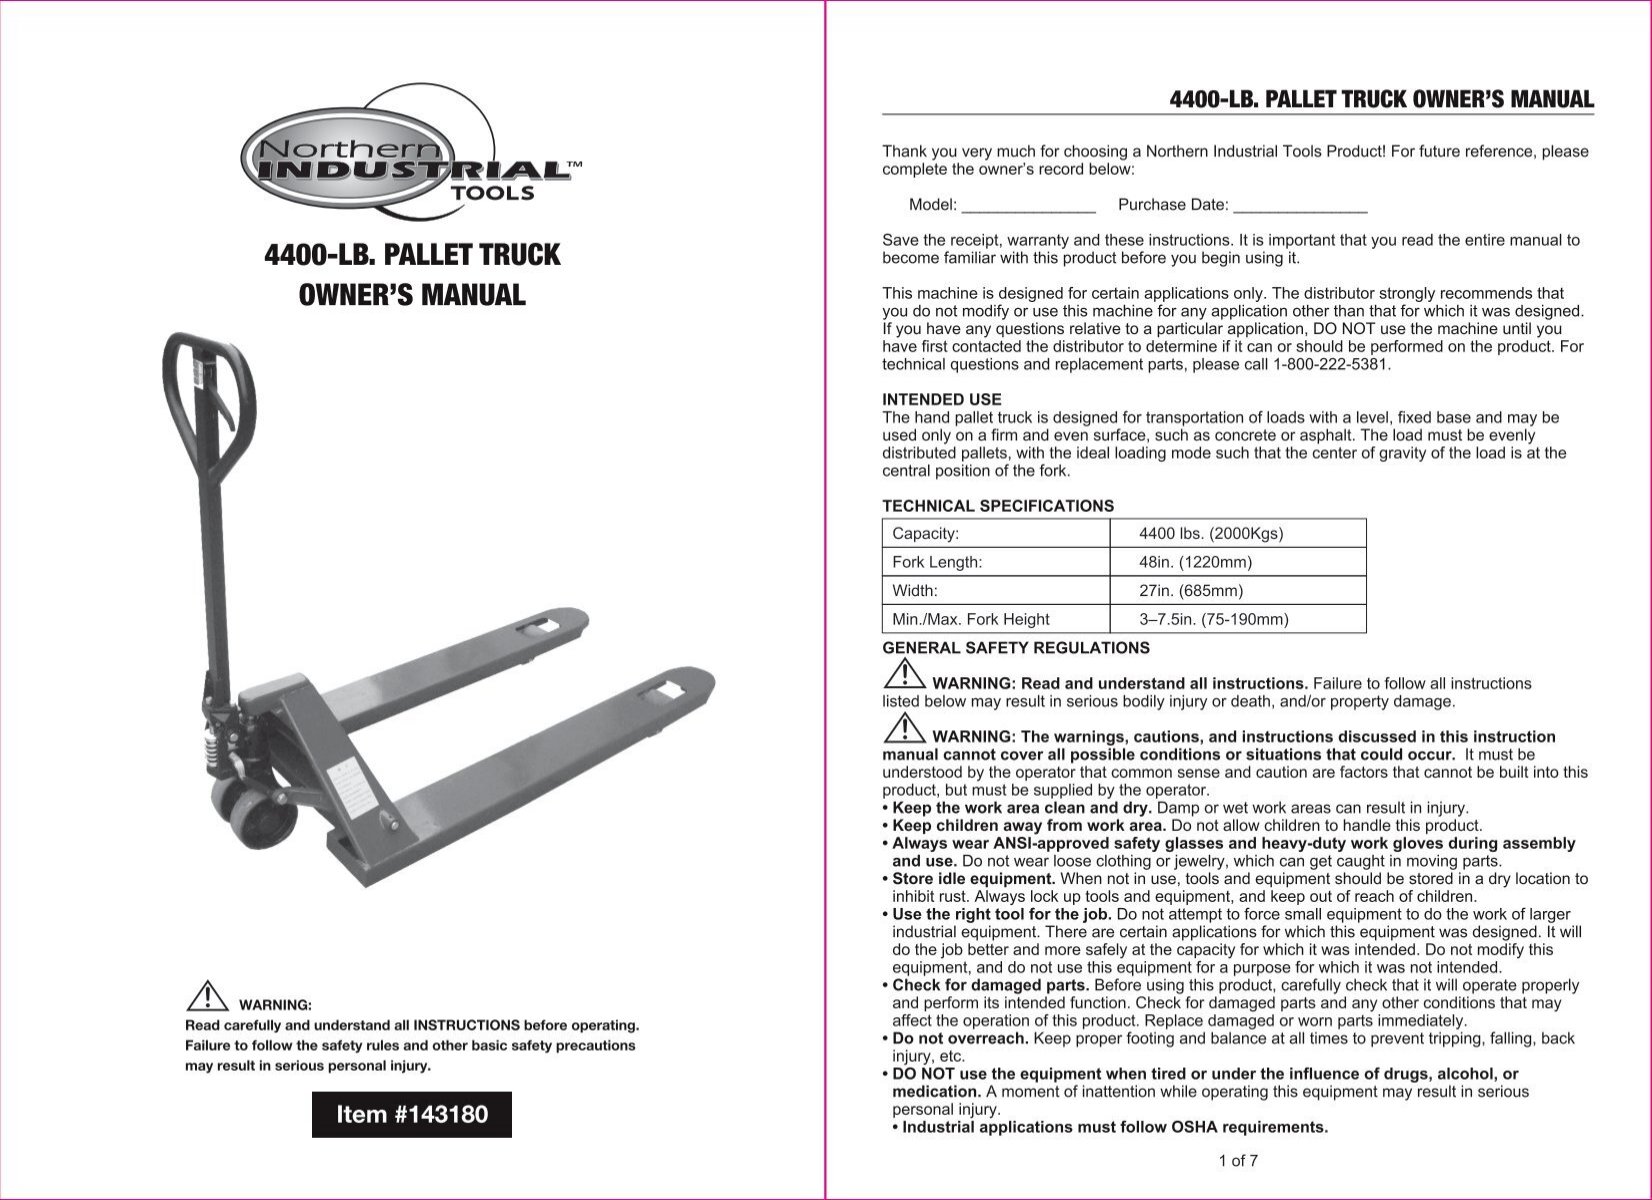 4400-LB. PALLET TRUCK OWNER'S MANUAL - Northern Tool +